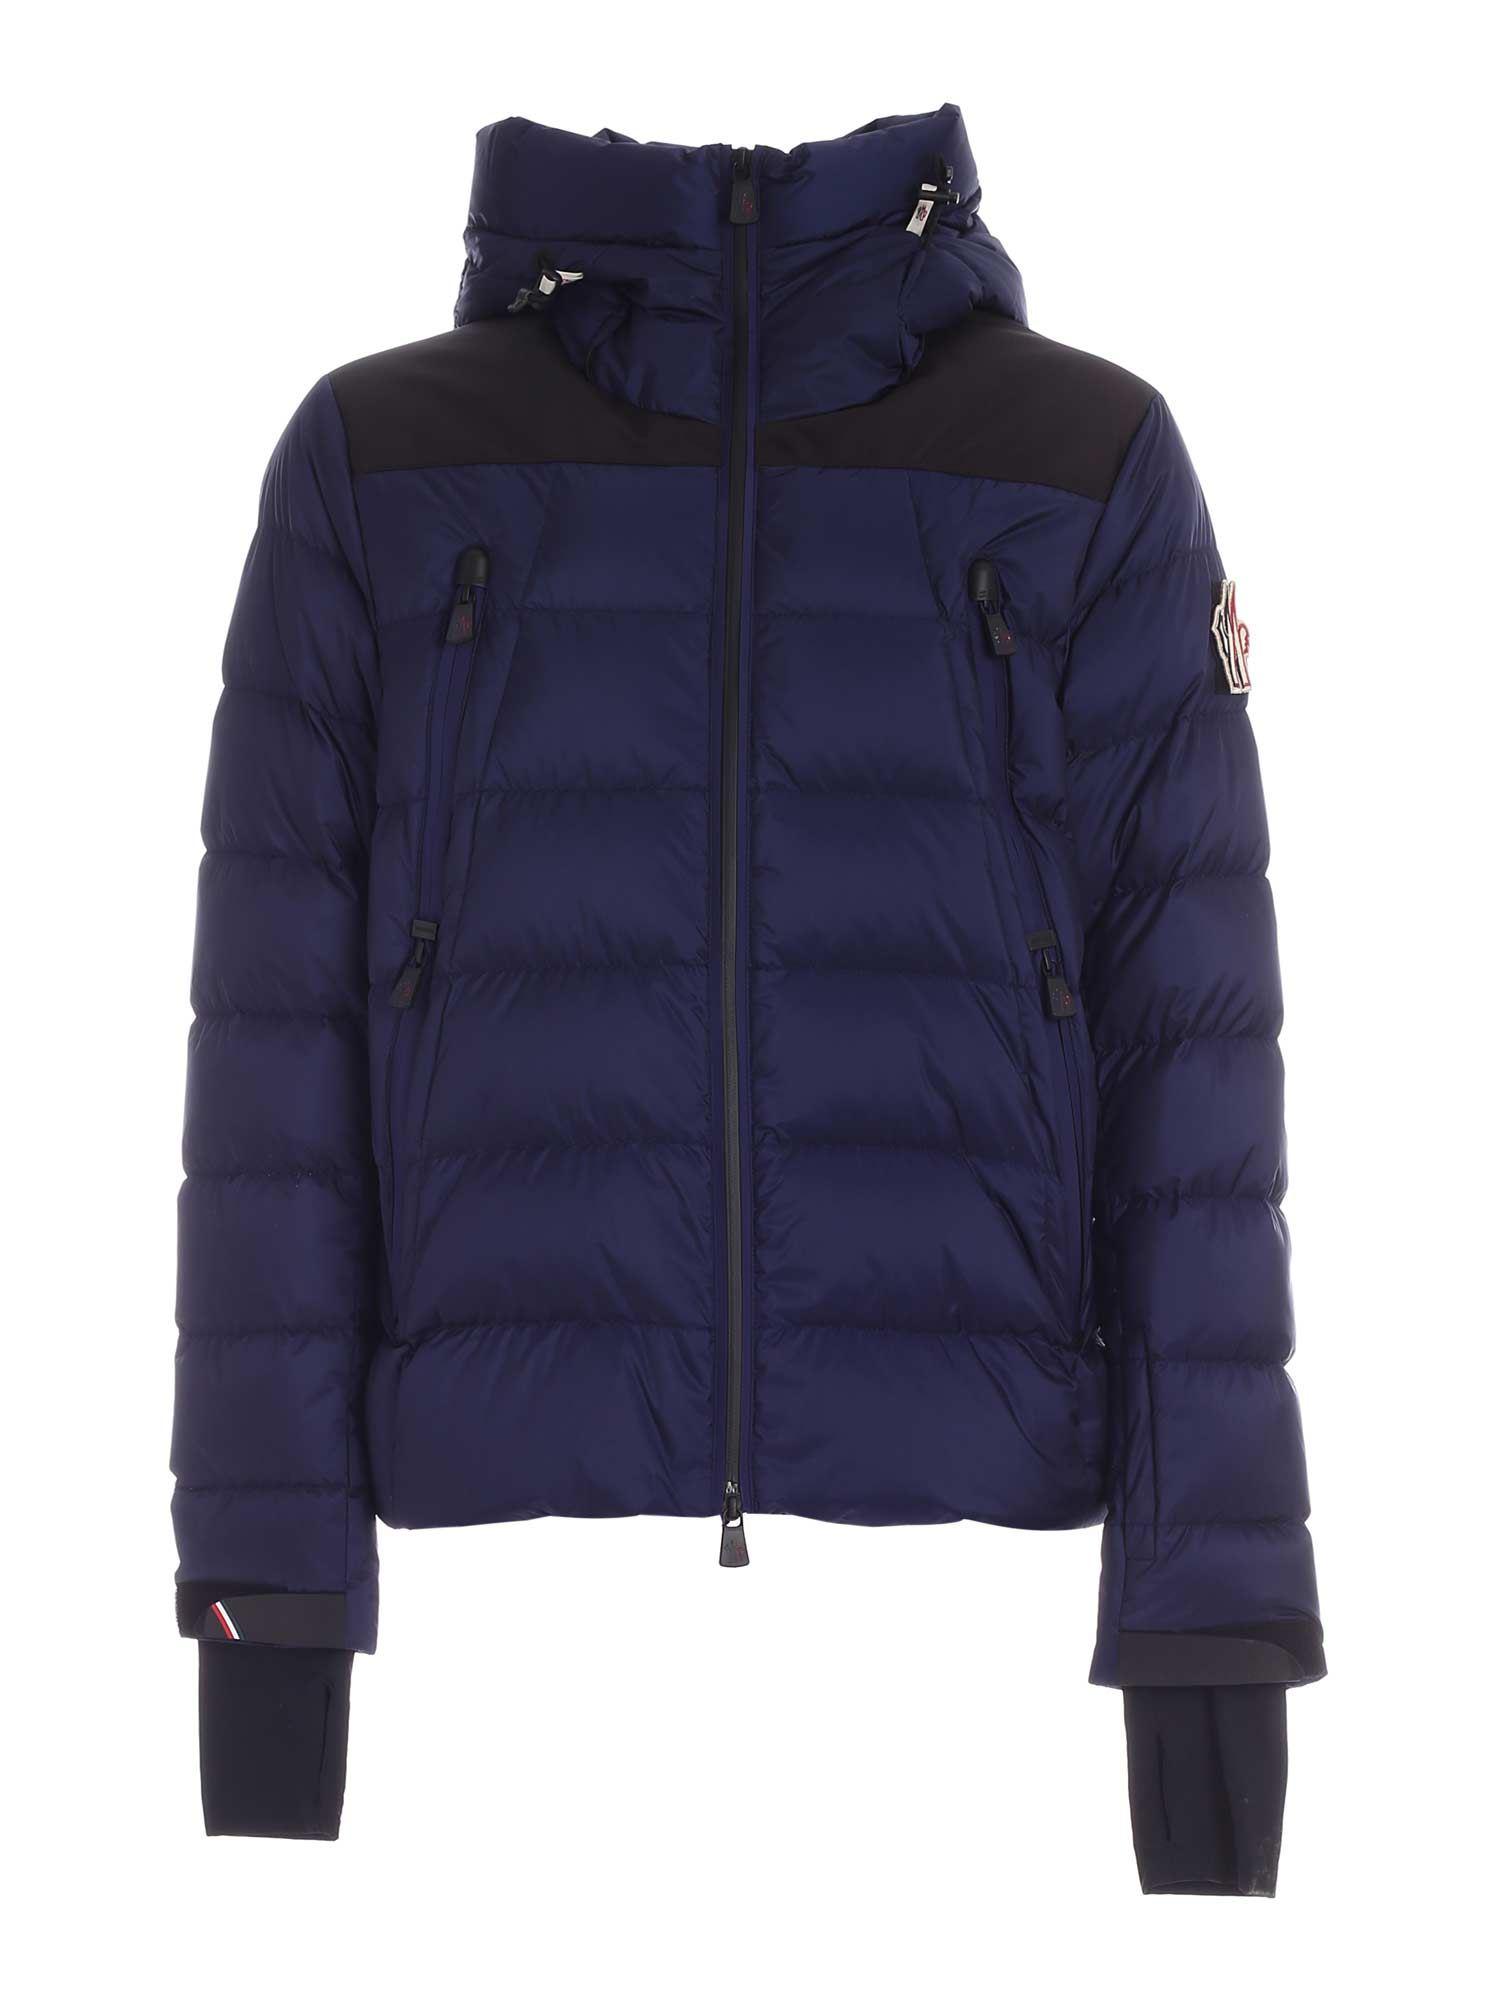 3 MONCLER GRENOBLE Synthetic Camurac Down Jacket in Blue for Men - Lyst